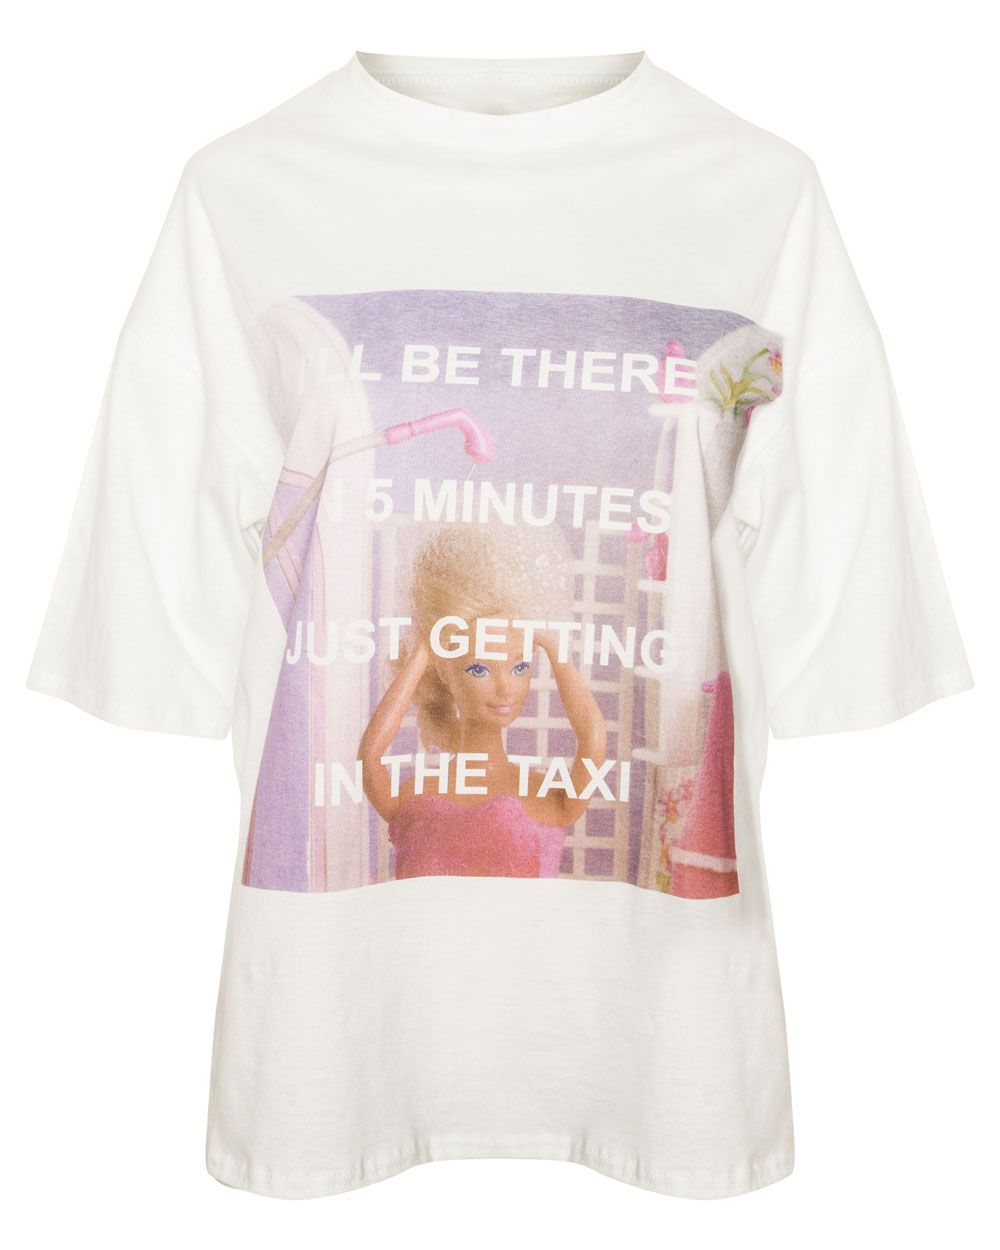 barbie t shirt missguided